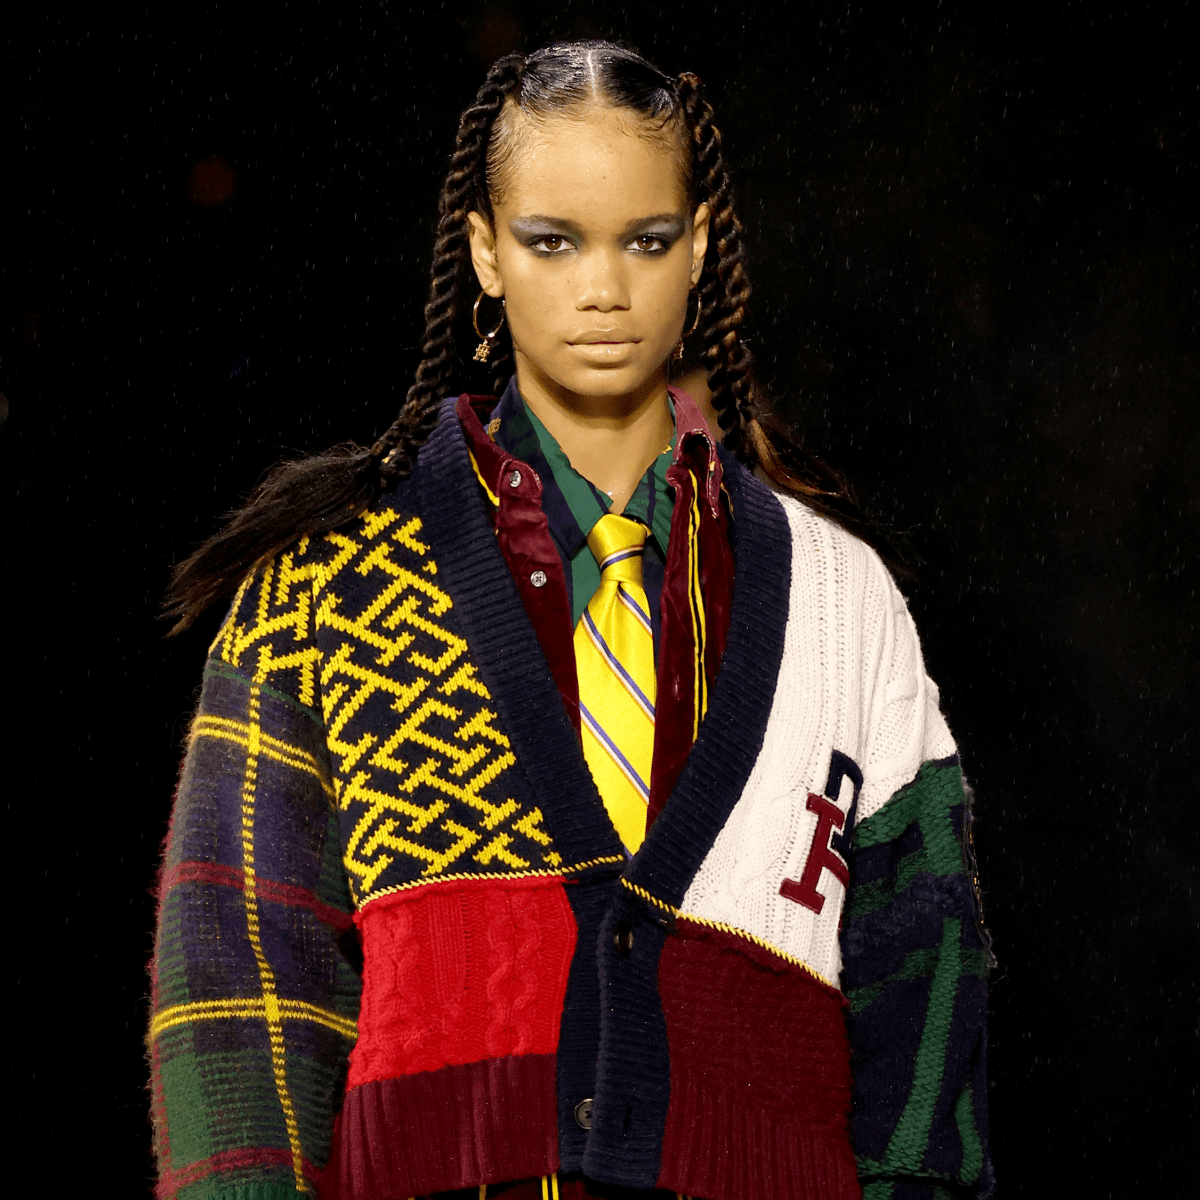 TOMMY HILFIGER Celebrates Pop Culture with Fall '22 Collection